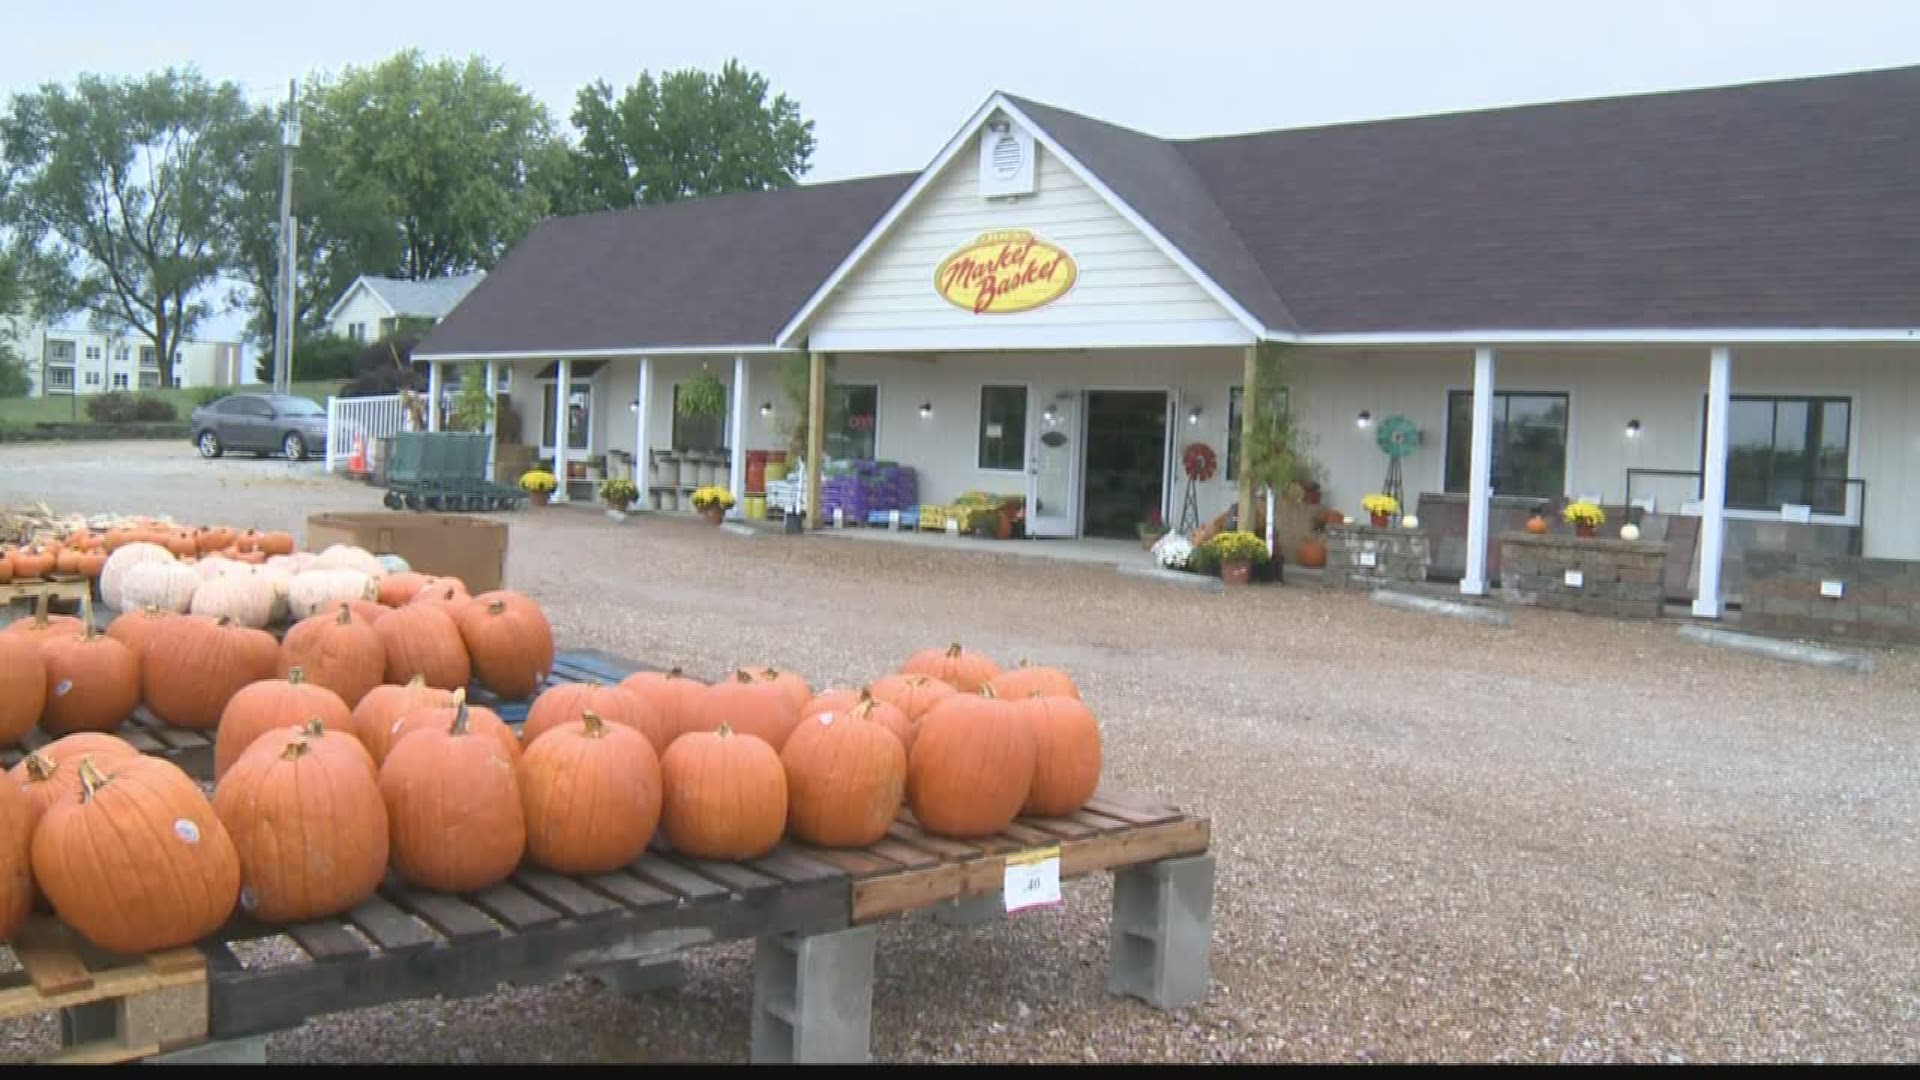 Get all the pumpkins and fall decorations you need at Joe’s Market Basket.